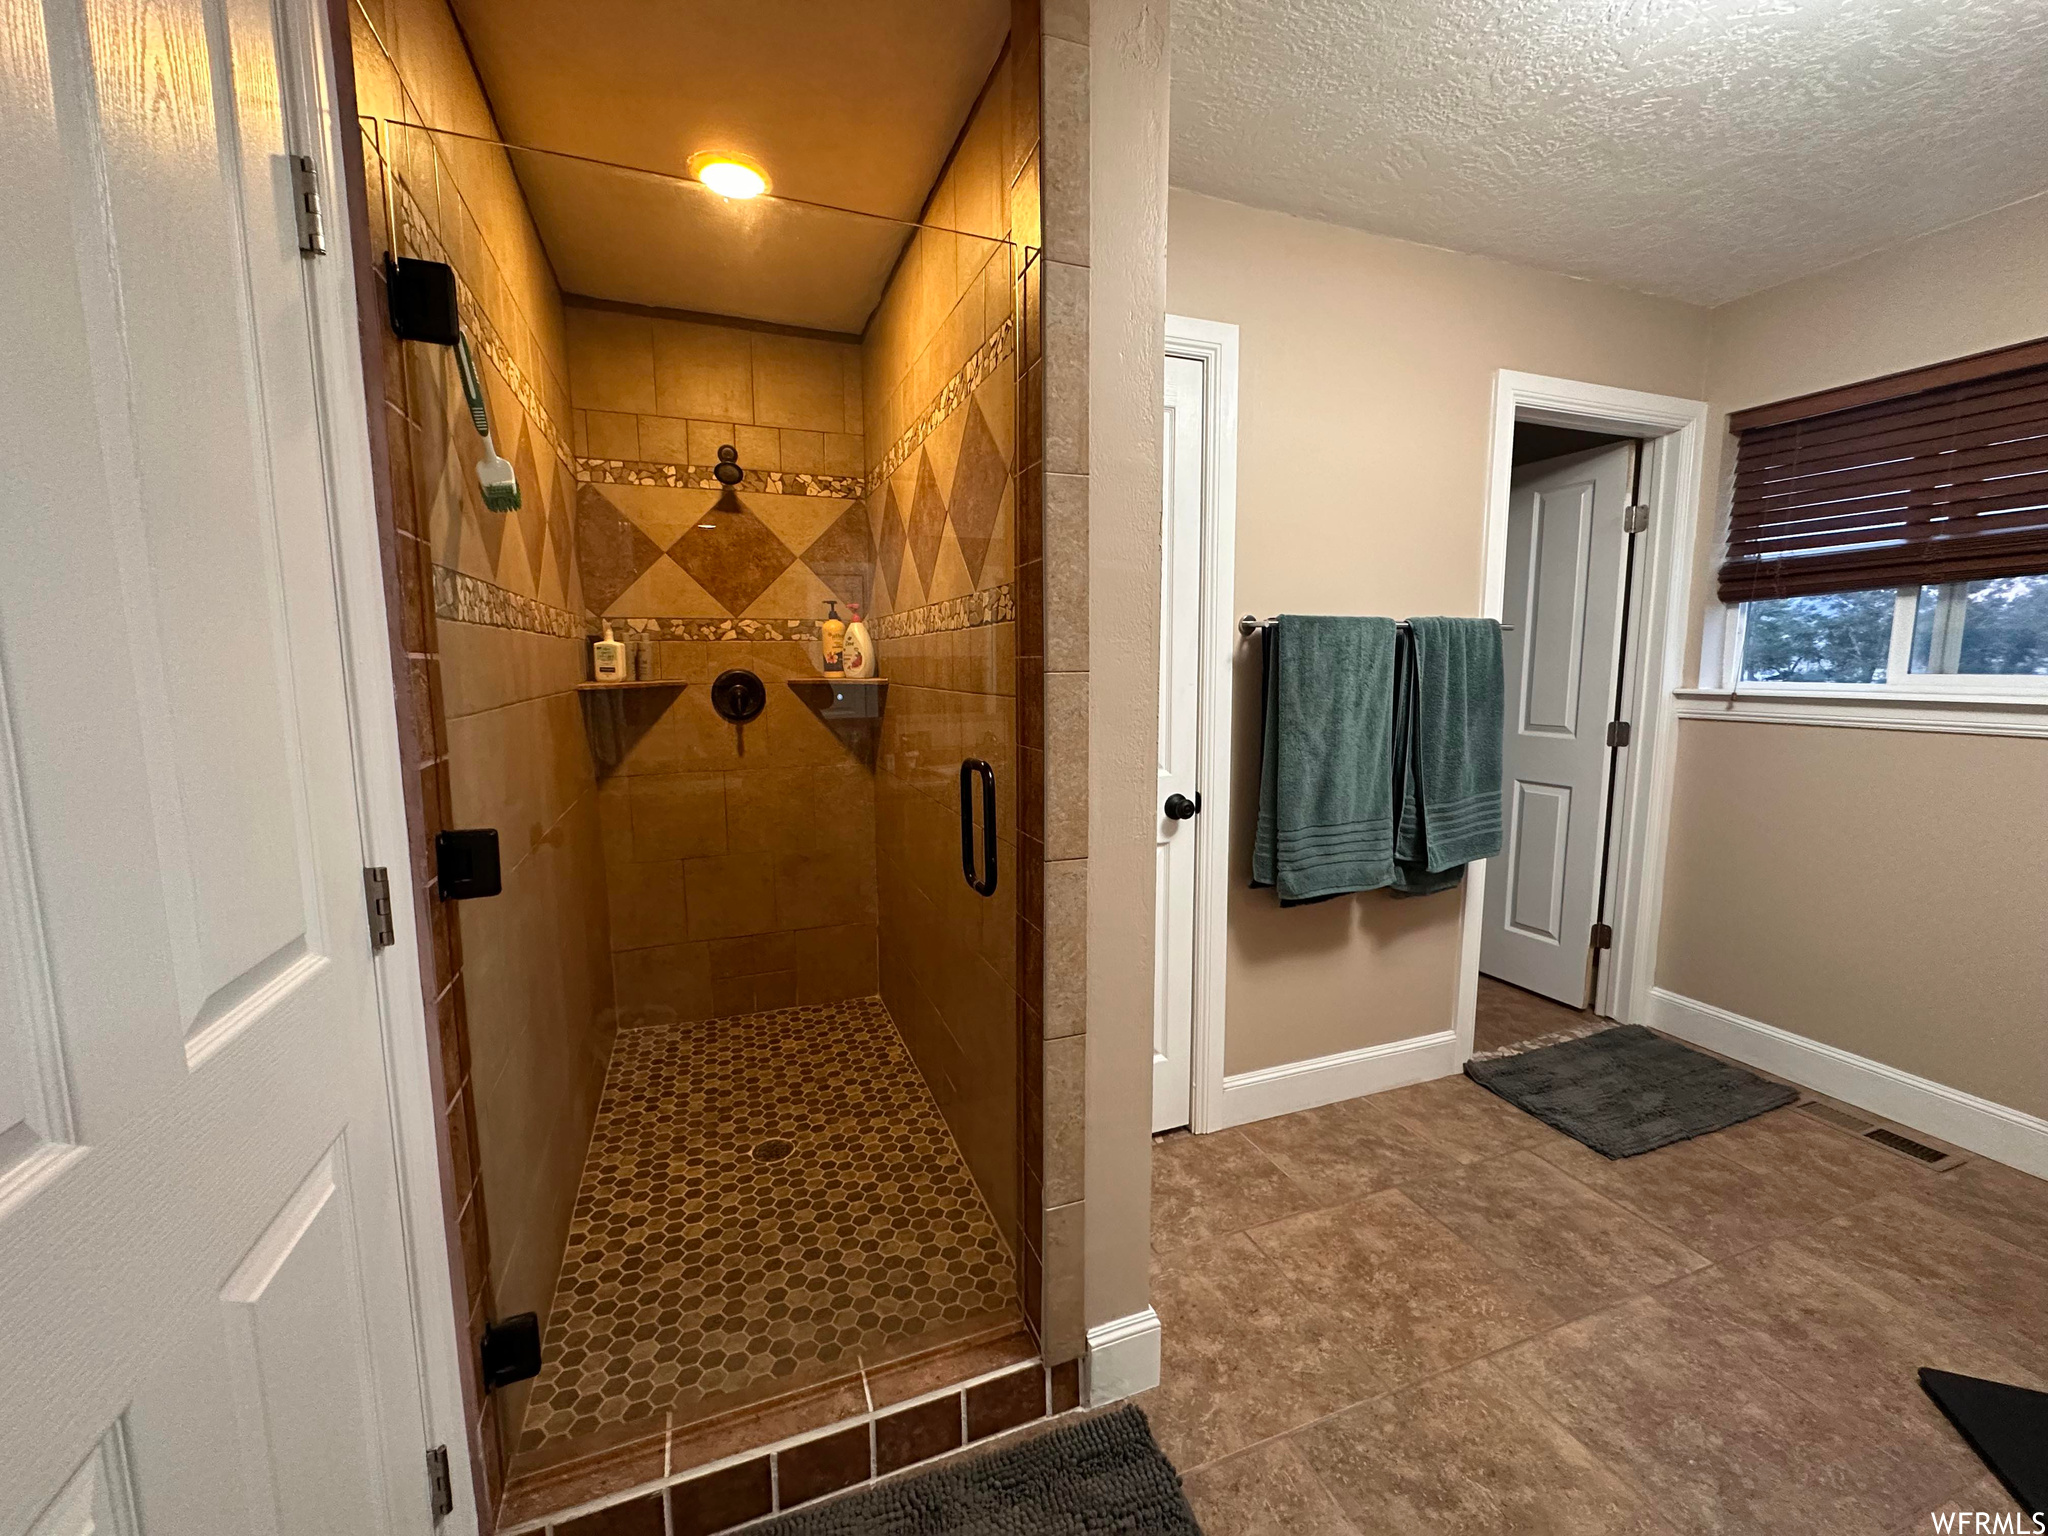 Bathroom featuring a textured ceiling, tile floors, and an enclosed shower